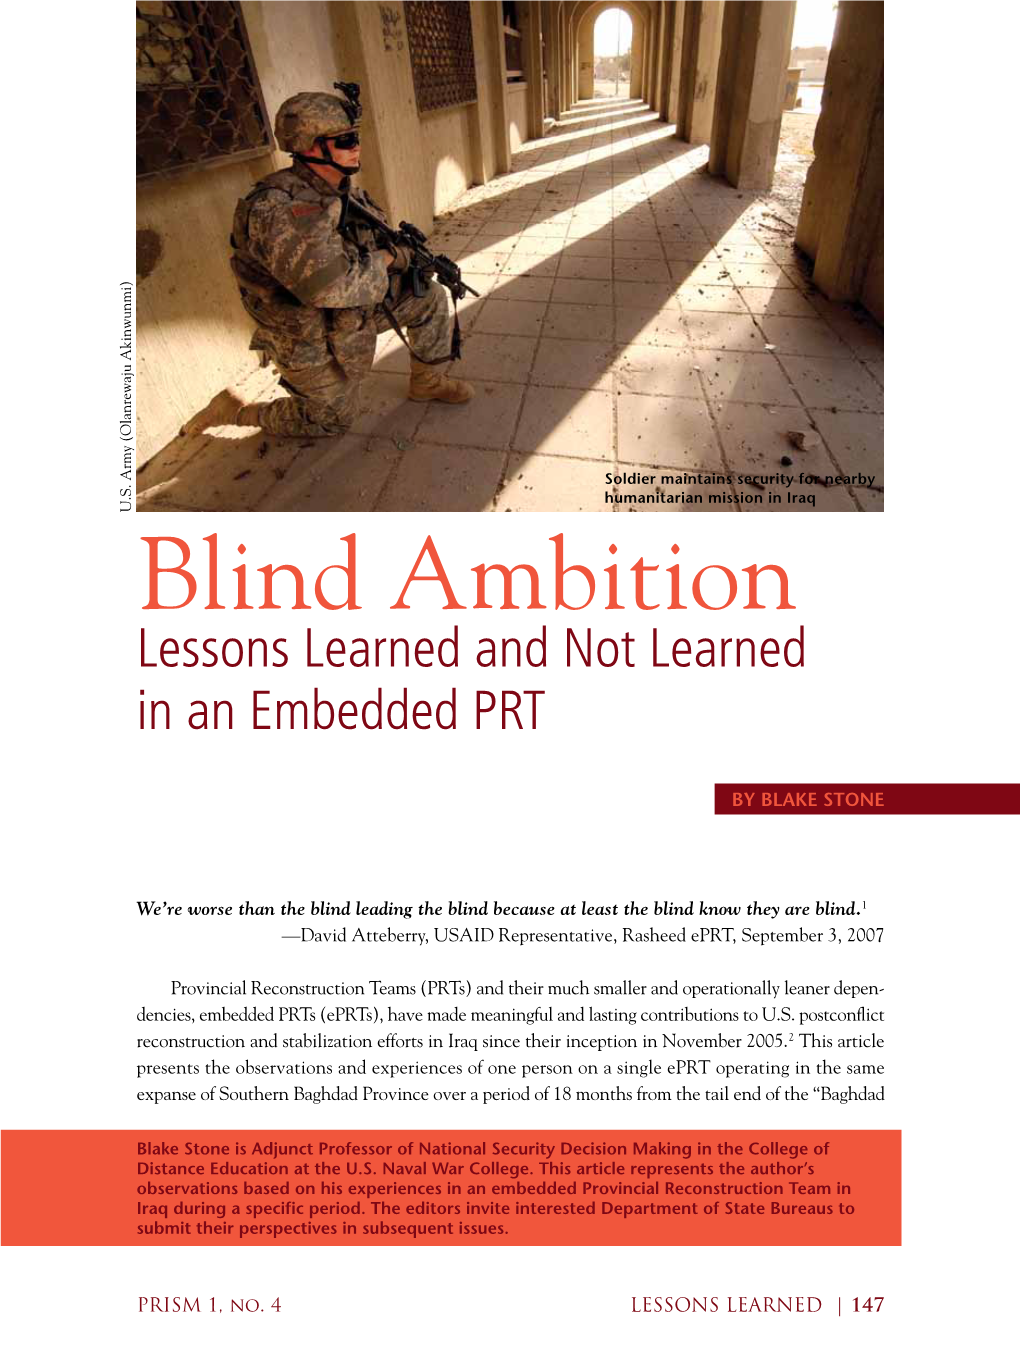 Blind Ambition: Lessons Learned and Not Learned in an Embedded